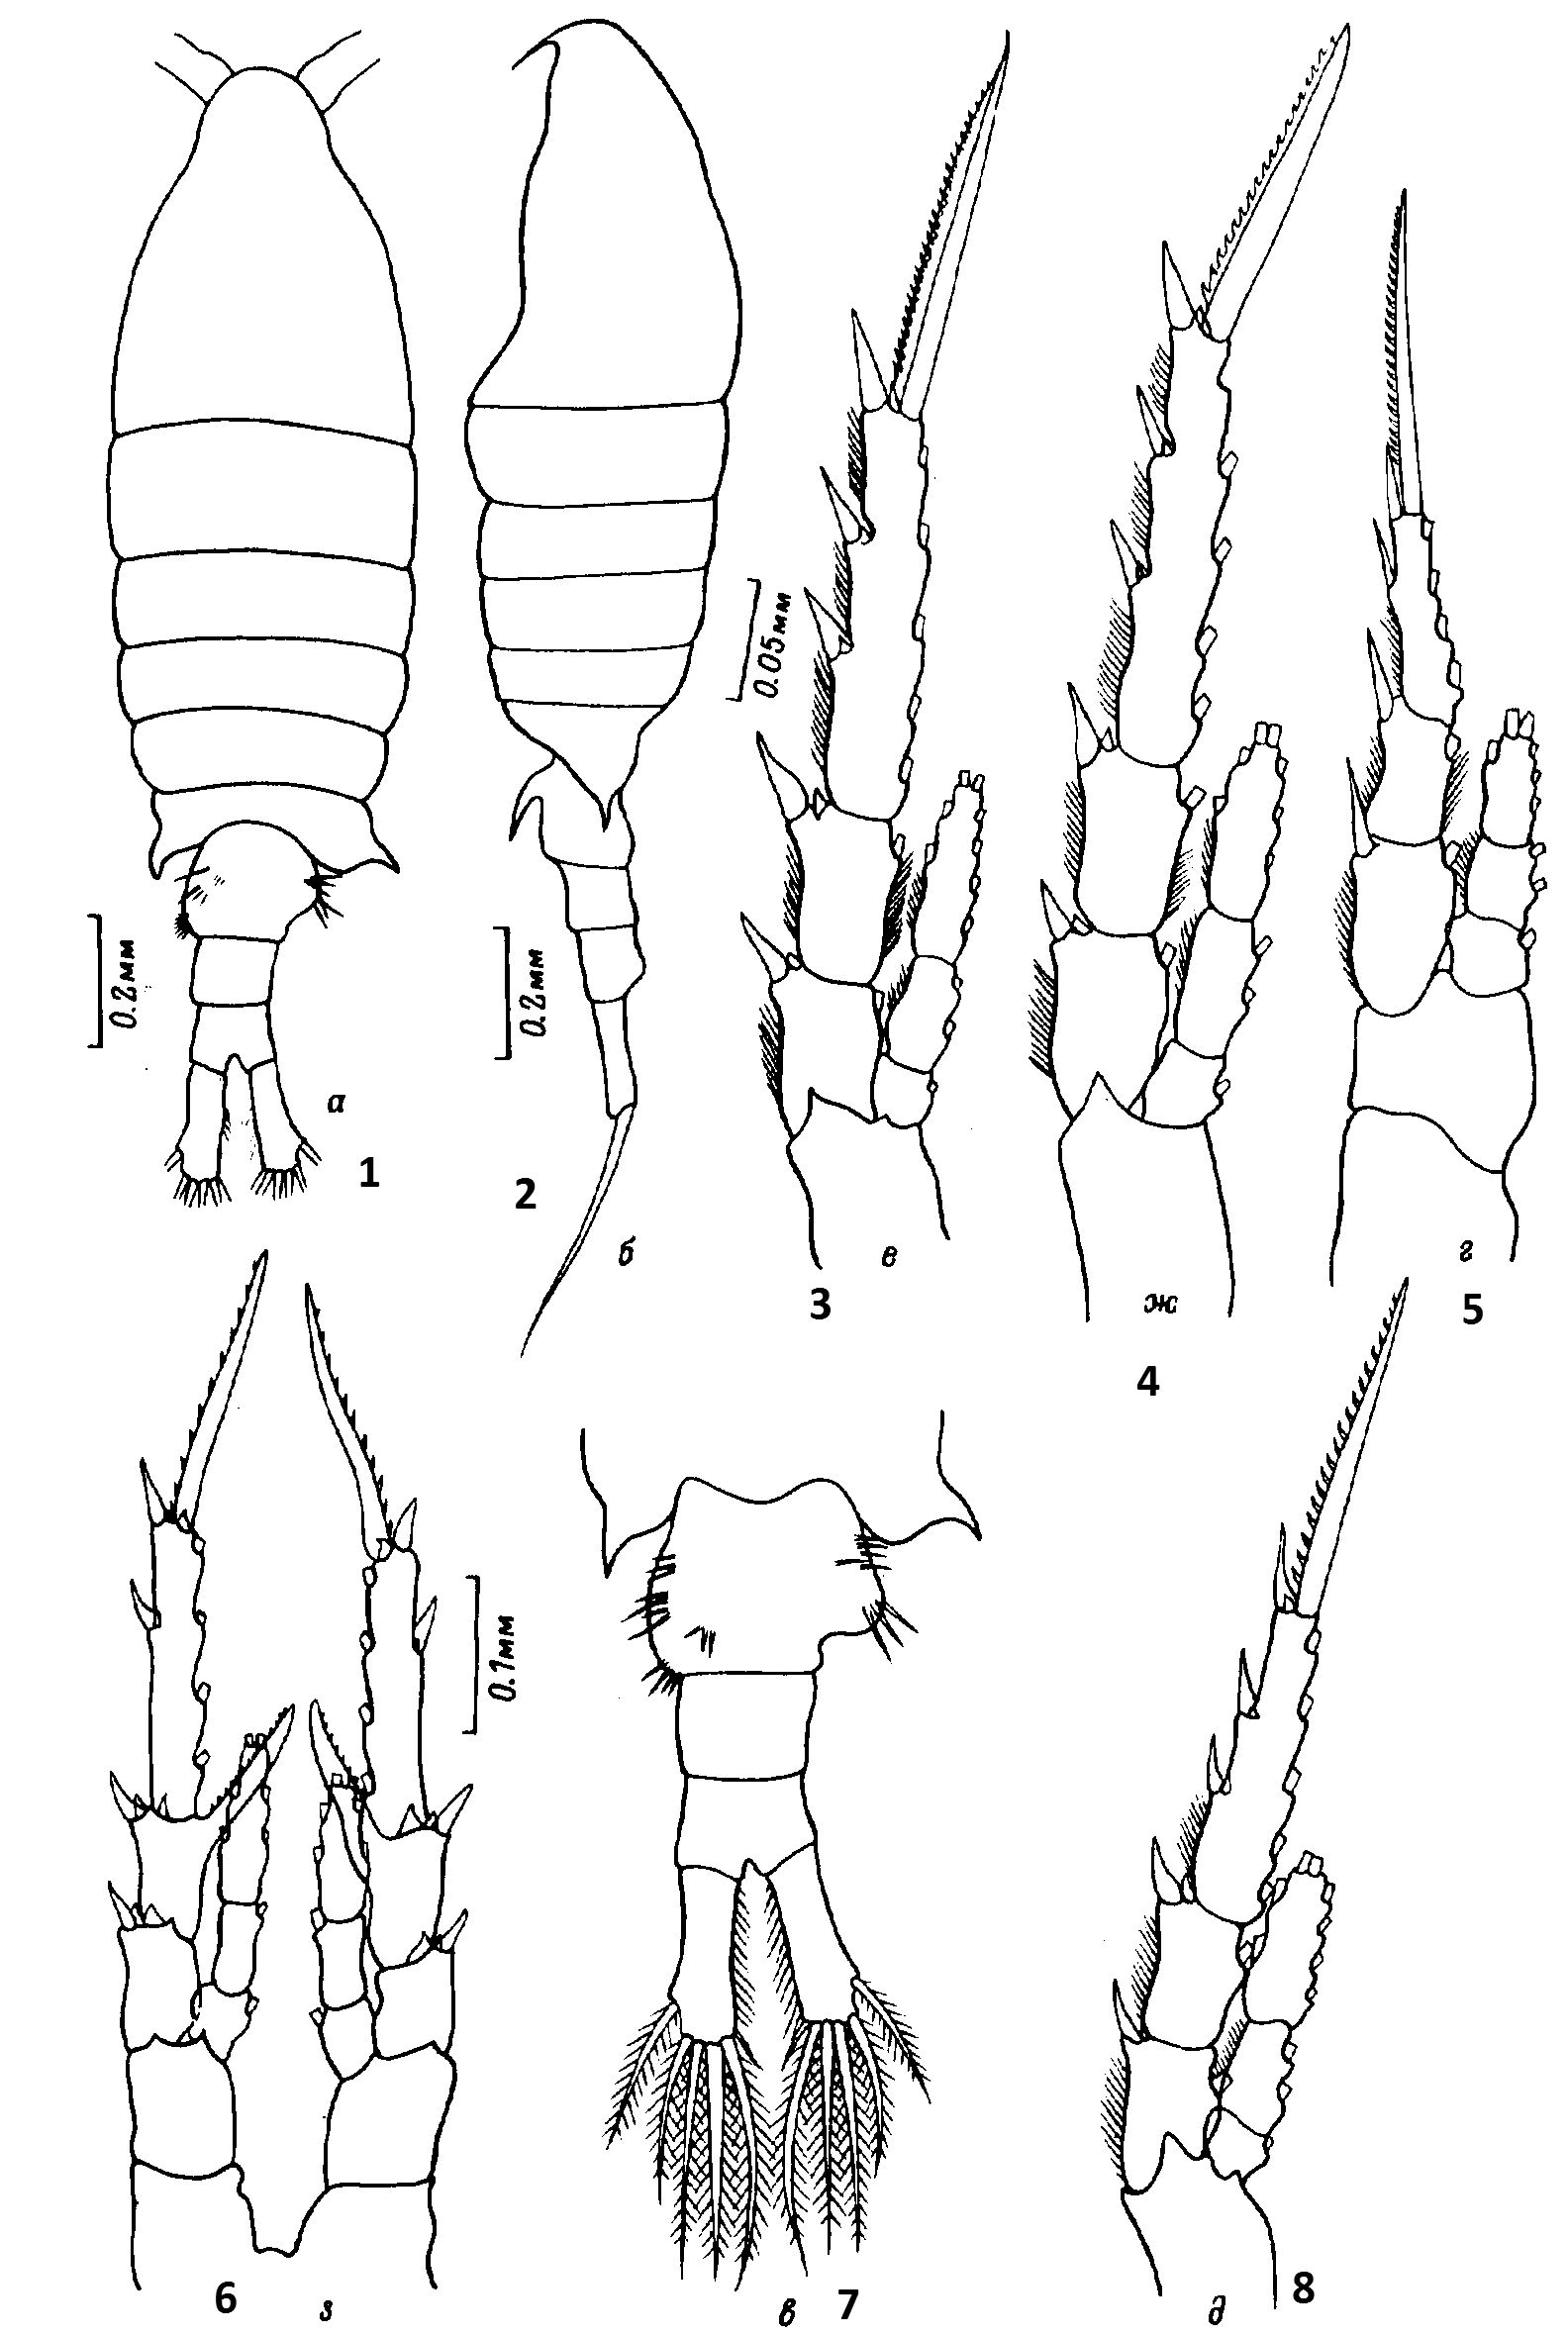 Species Centropages abdominalis - Plate 9 of morphological figures